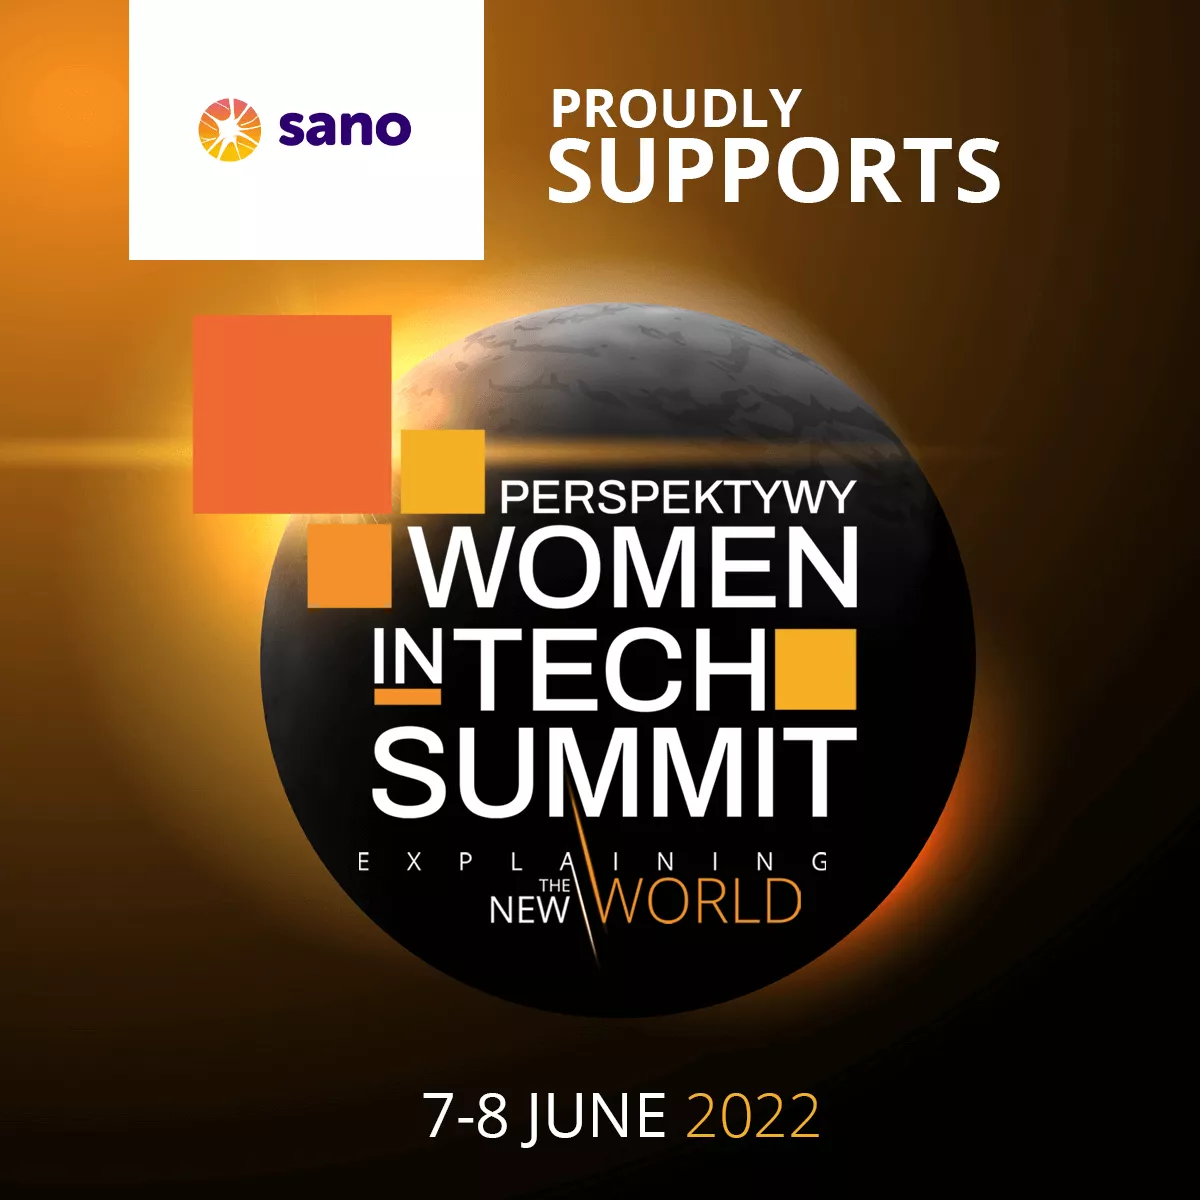 Sano will be present at Perspektywy Women in Tech Summit in Warsaw